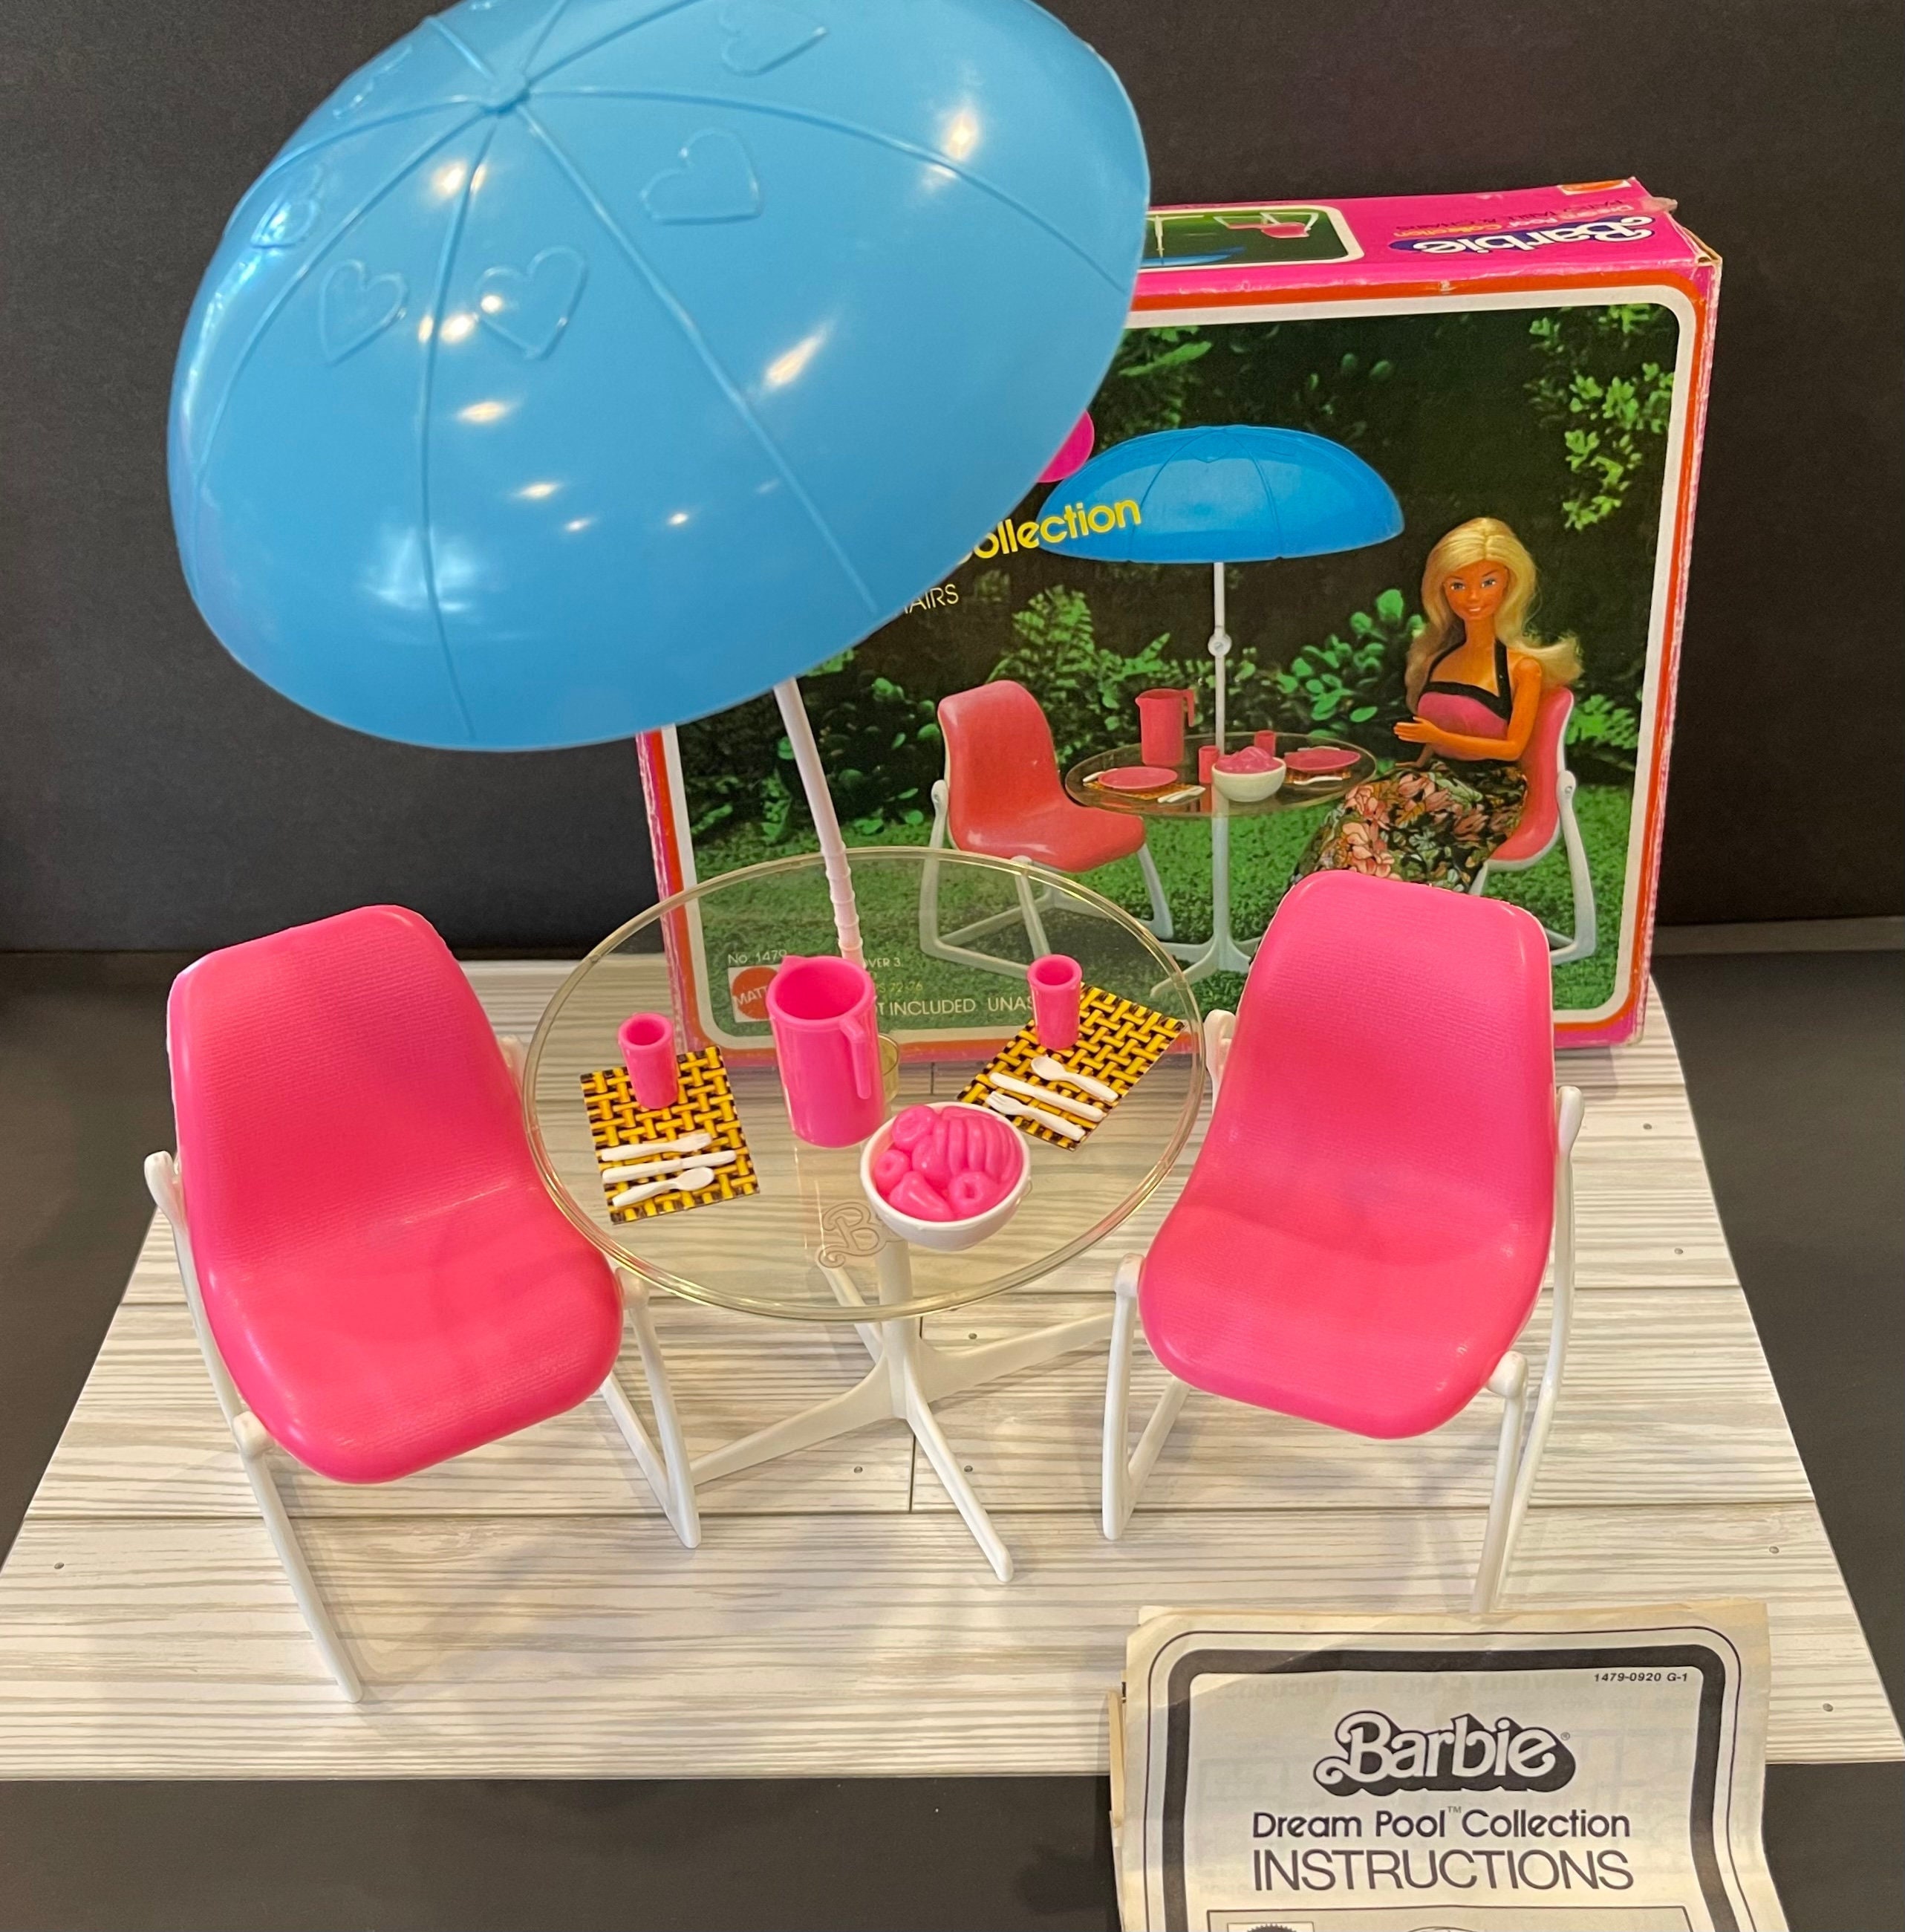 BARBIE DREAM POOL Collectionpatio Table Chairs Umbrella and - Etsy